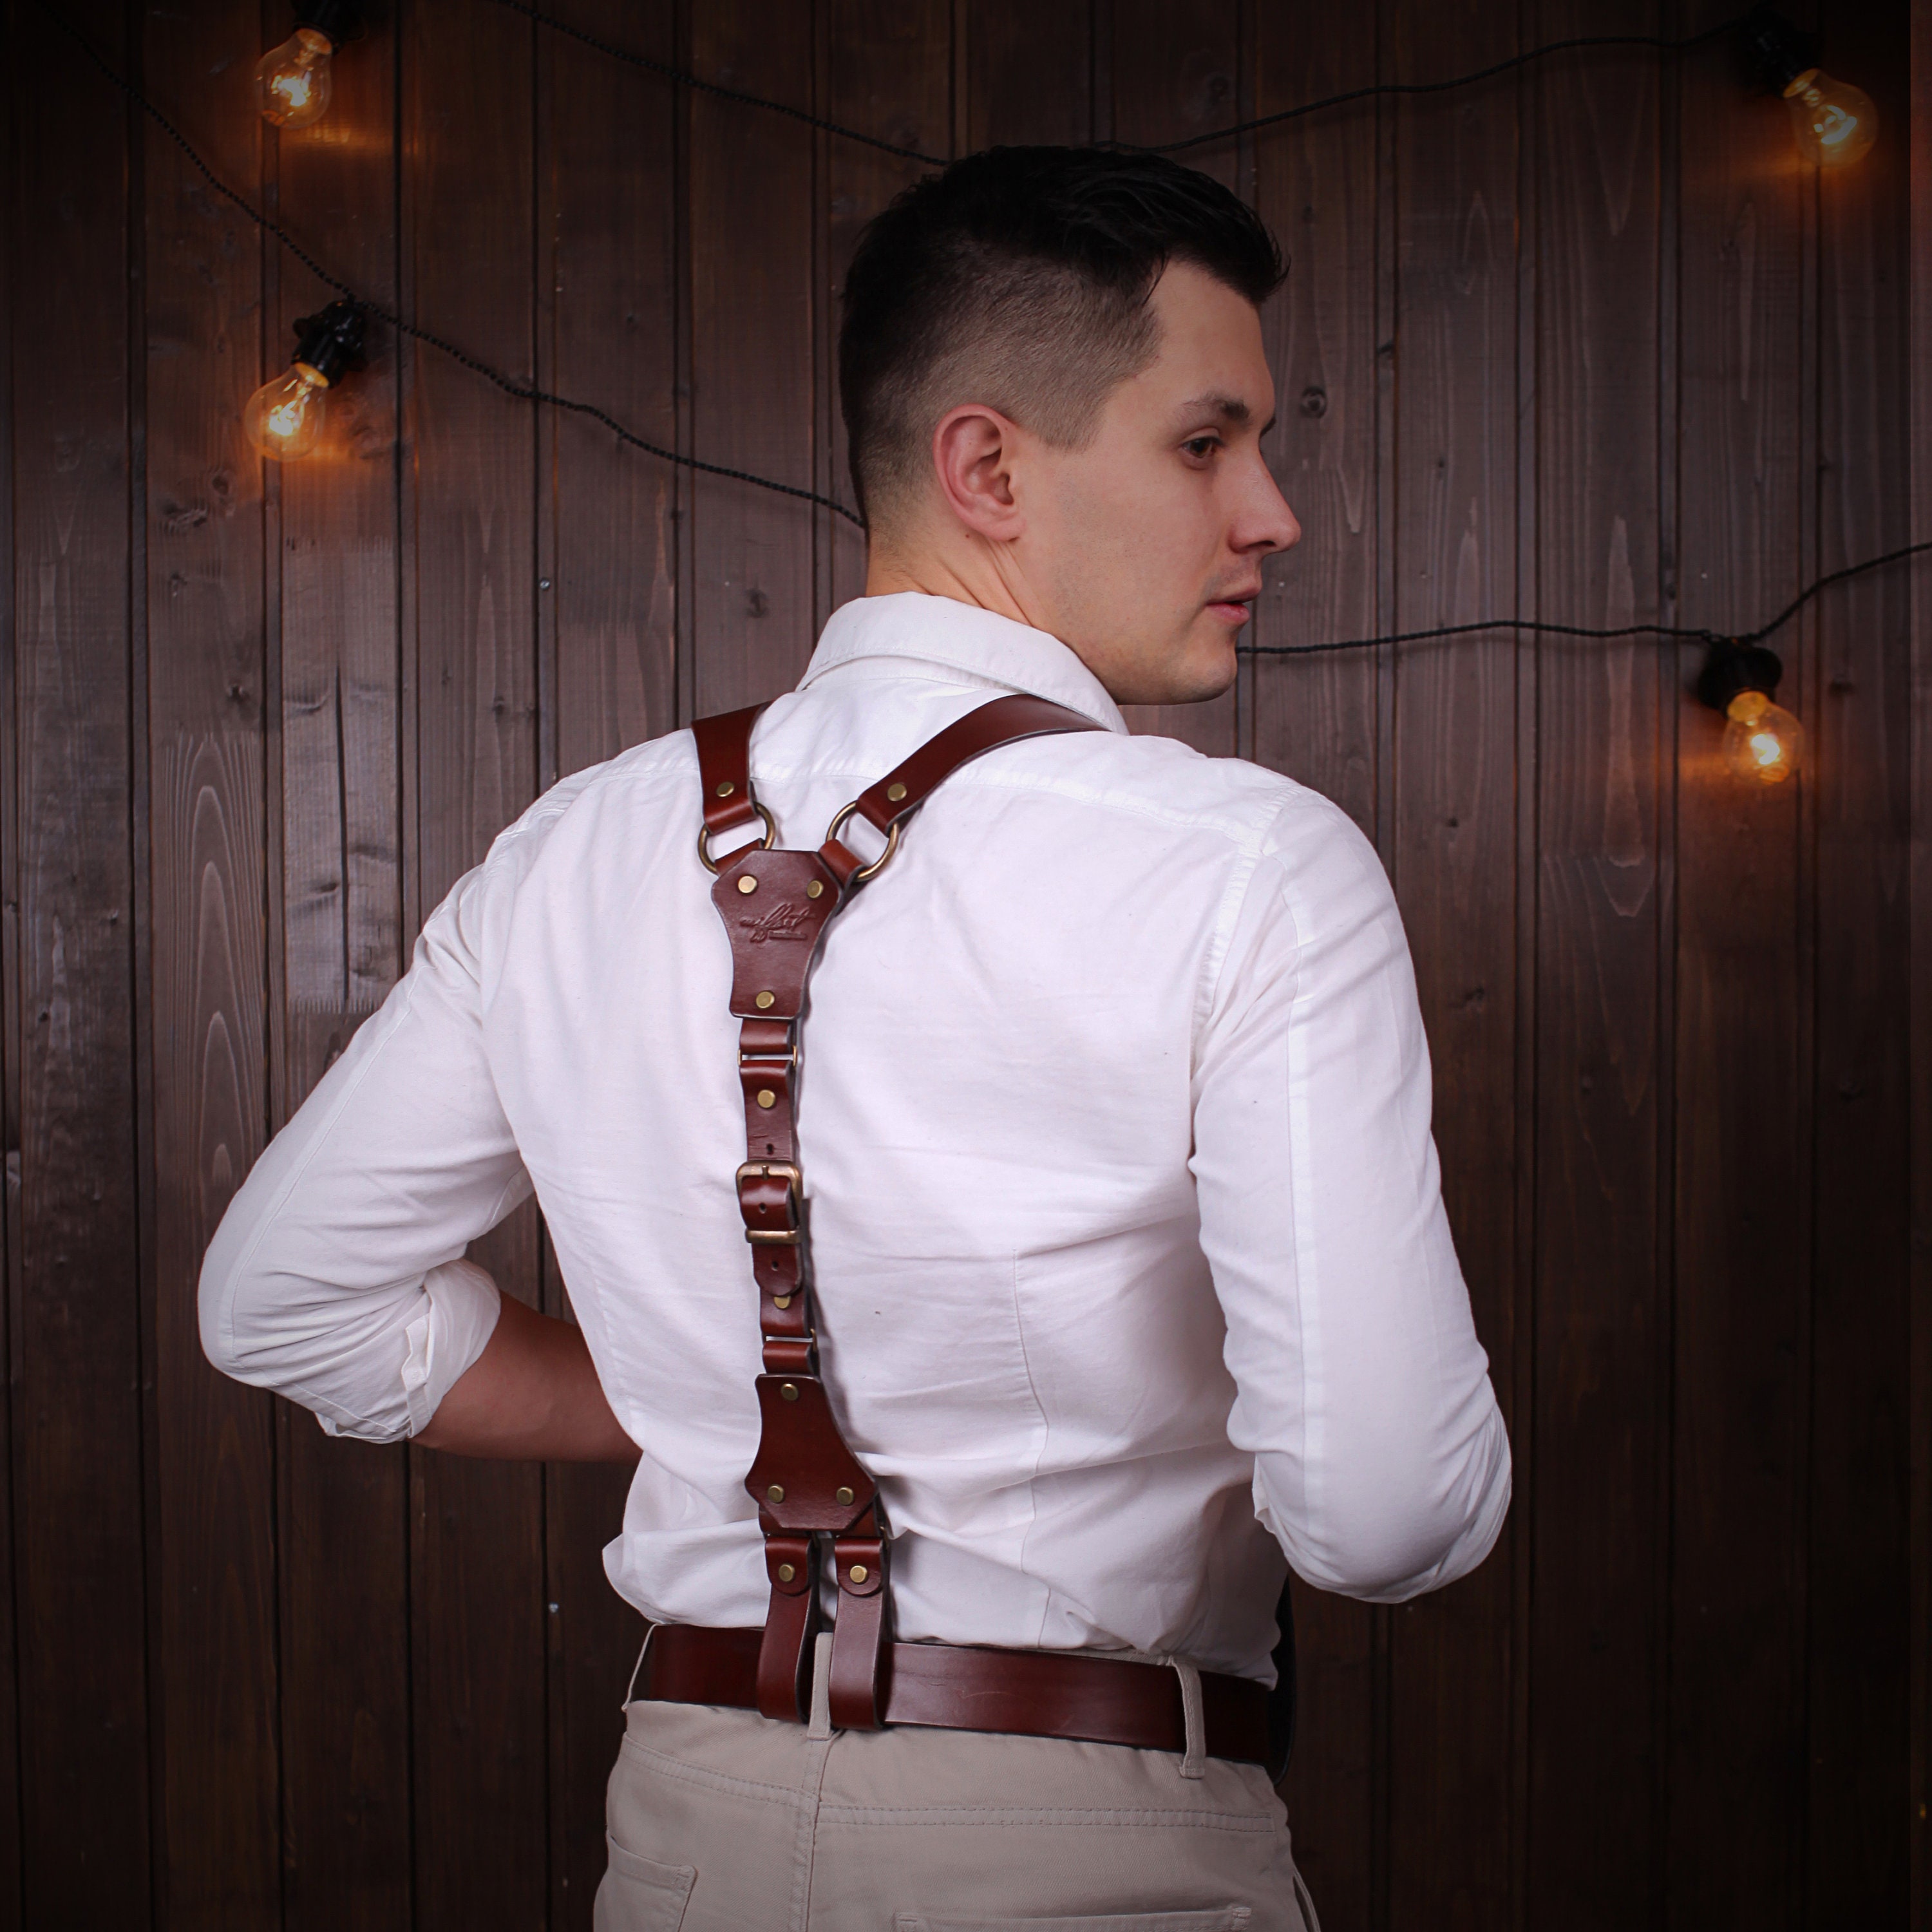 Mens Suspenders, Versatile Leather Harnesses and Accessories for